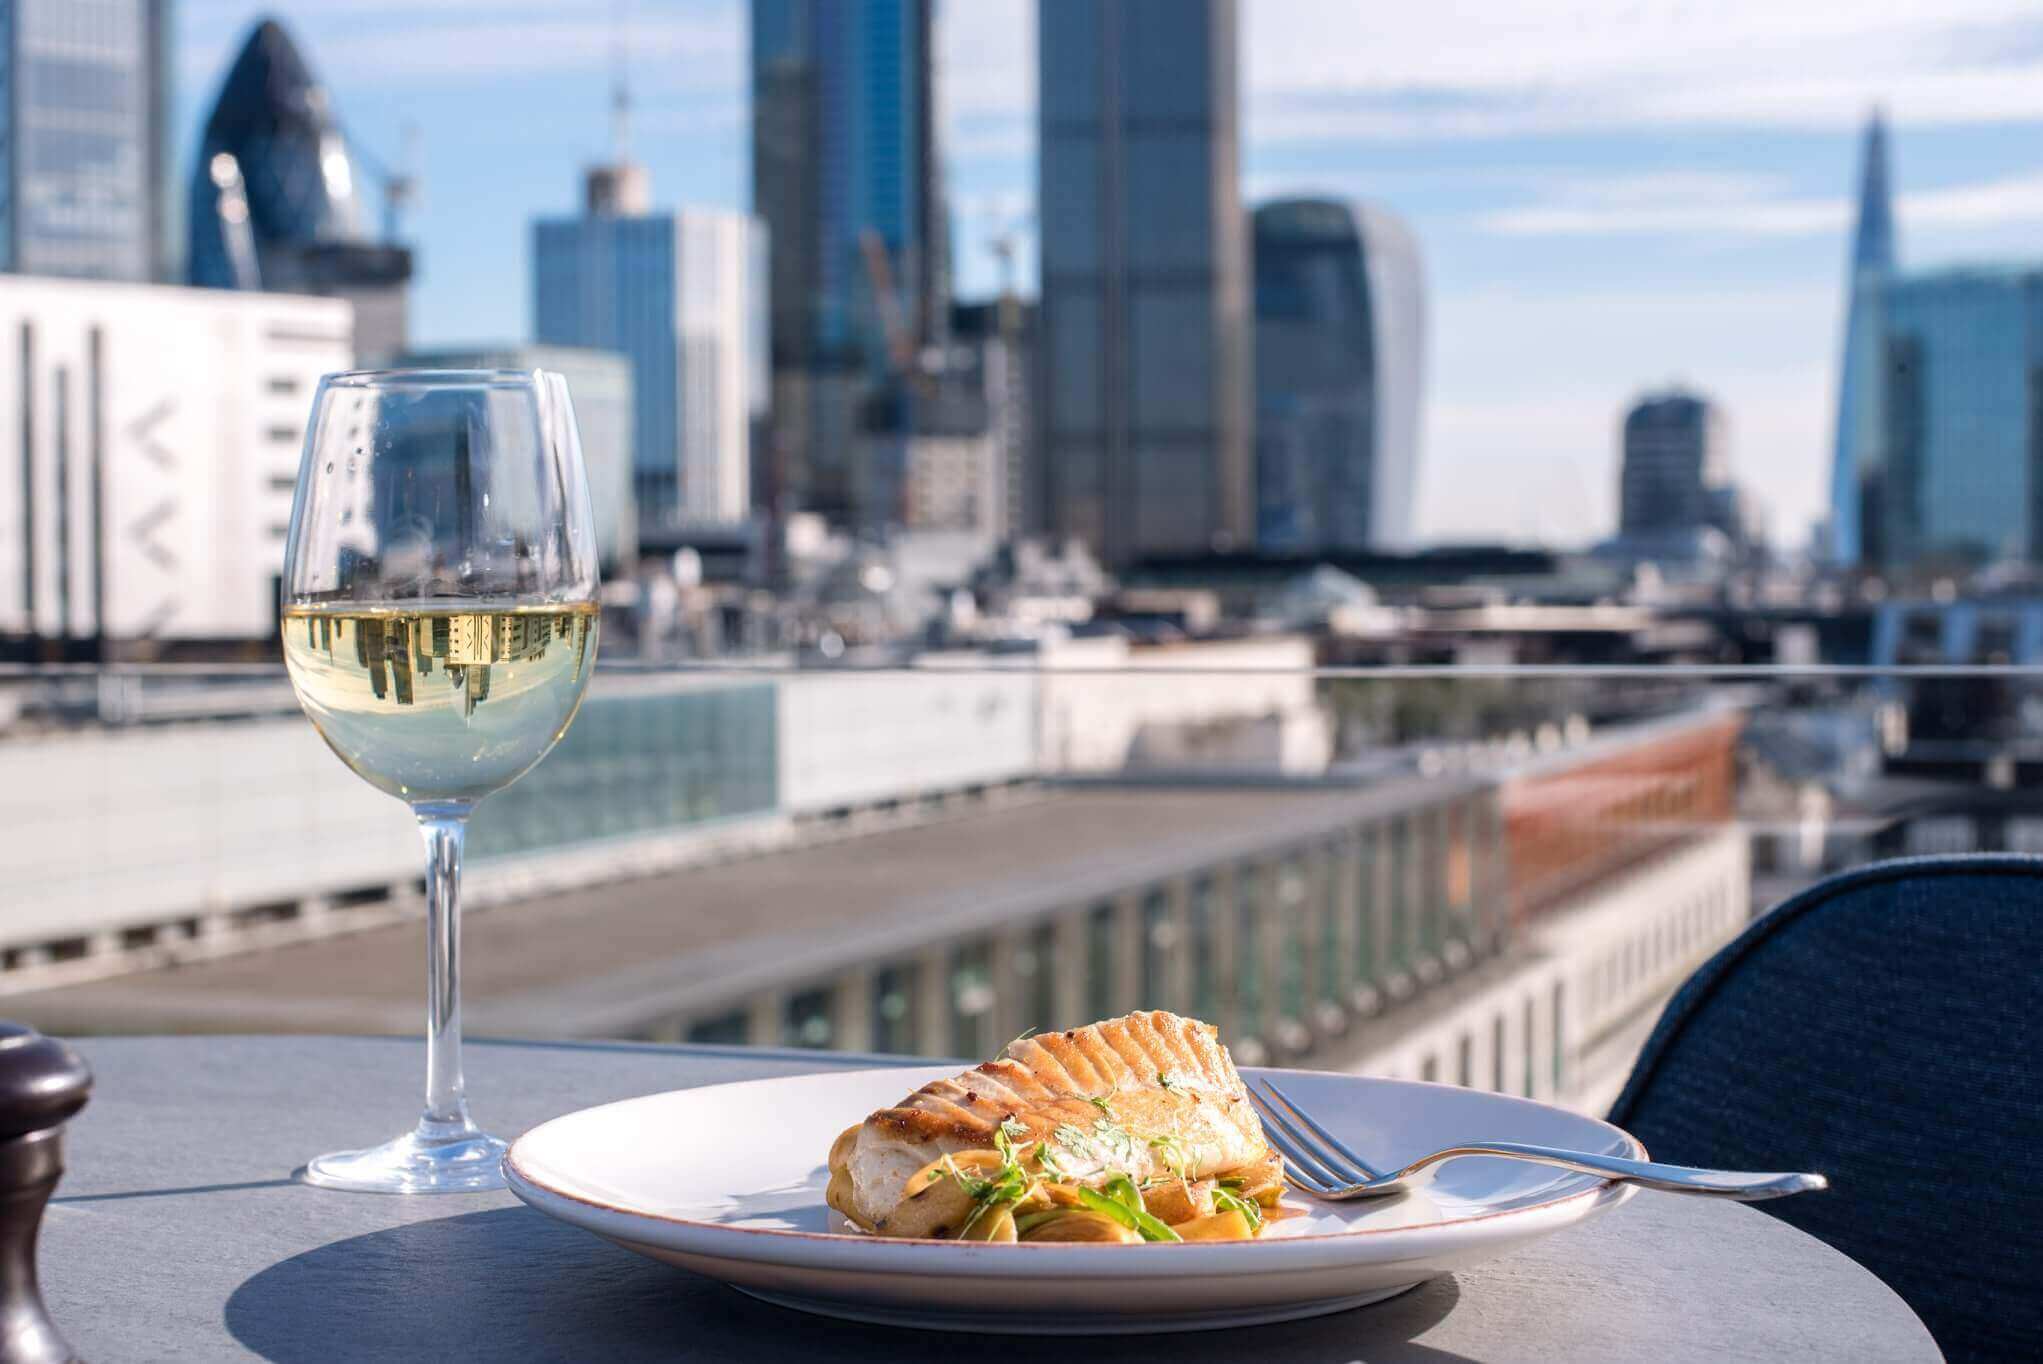 Breakfast and View over London at the Aviary | 10 best spots to Brunch with a view in London